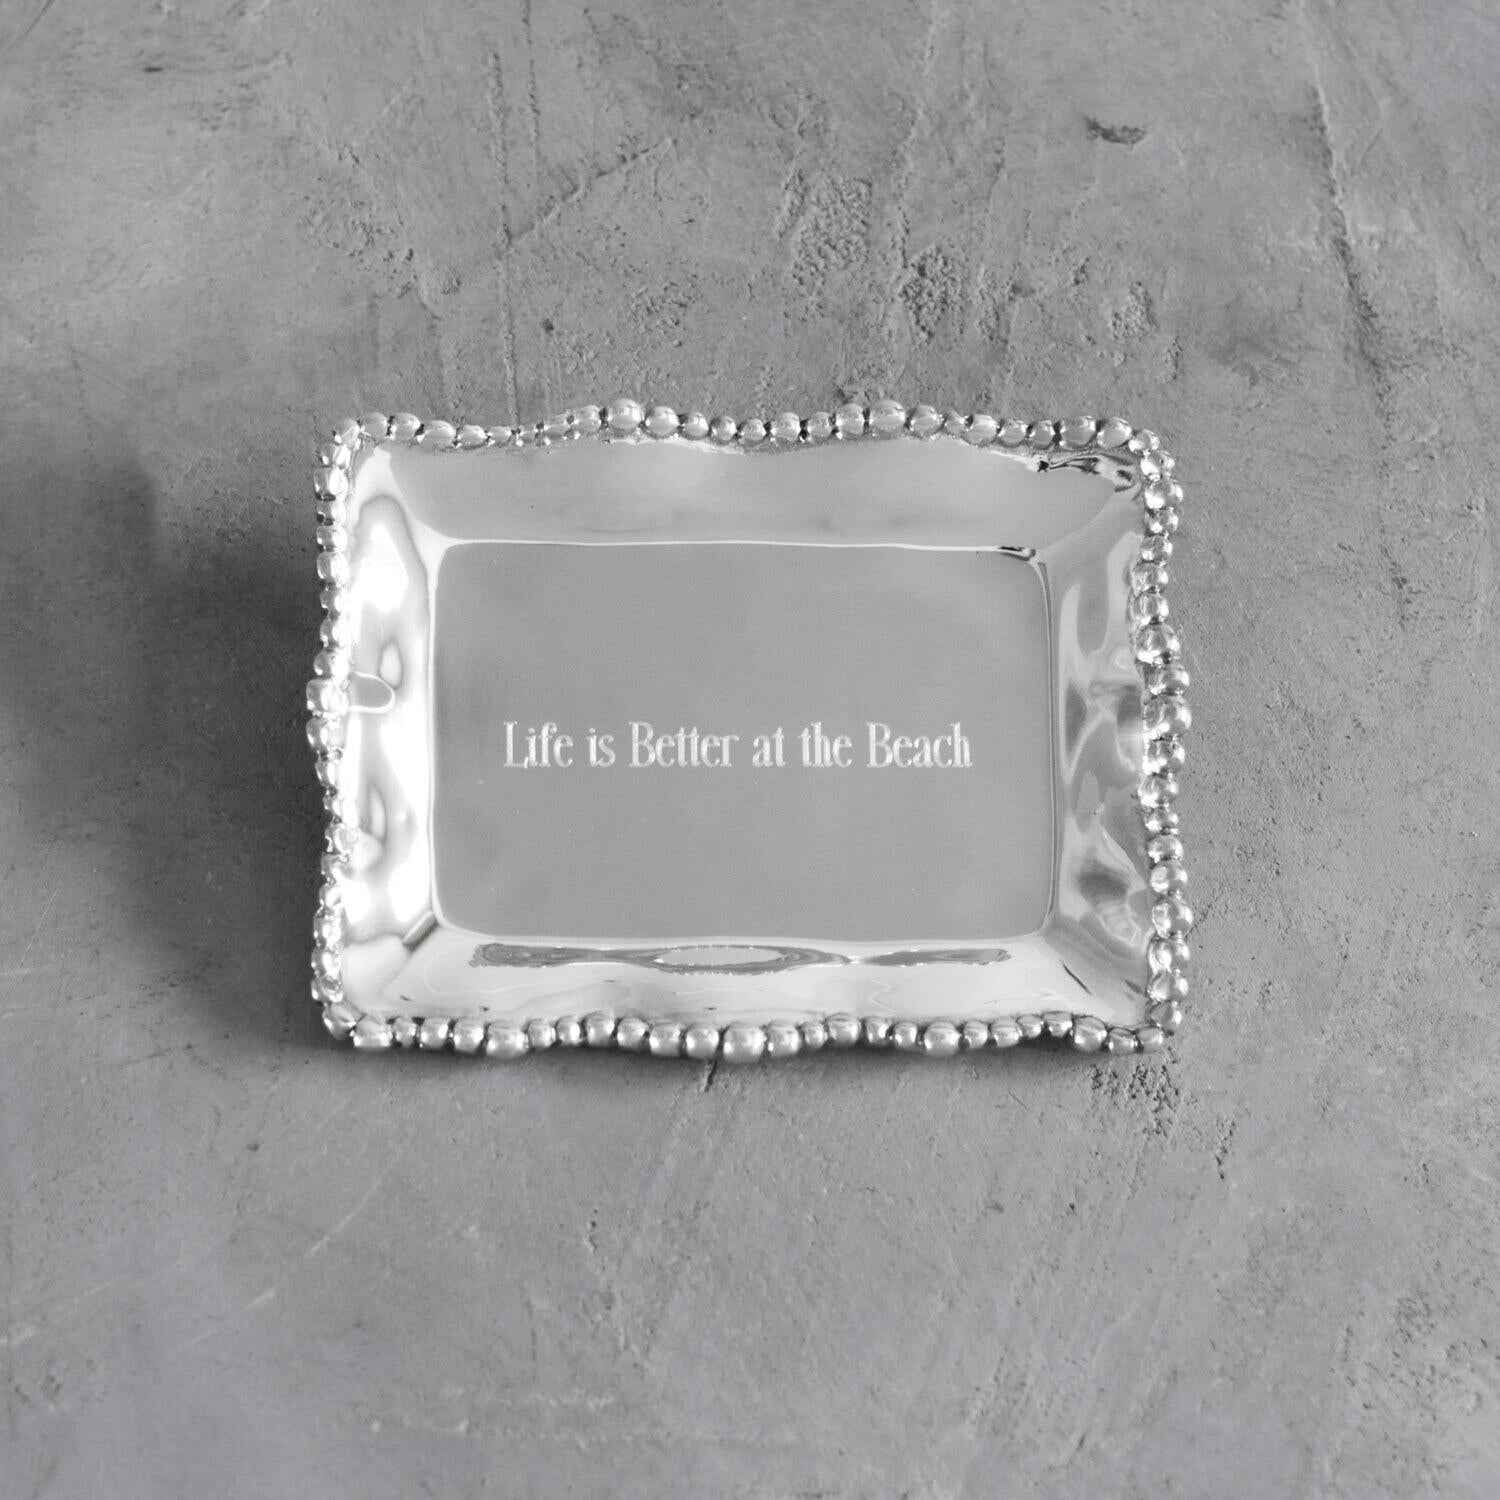 GIFTABLES Organic Pearl Rectangular Engraved Tray &quot;Life is Better at the Beach&quot;